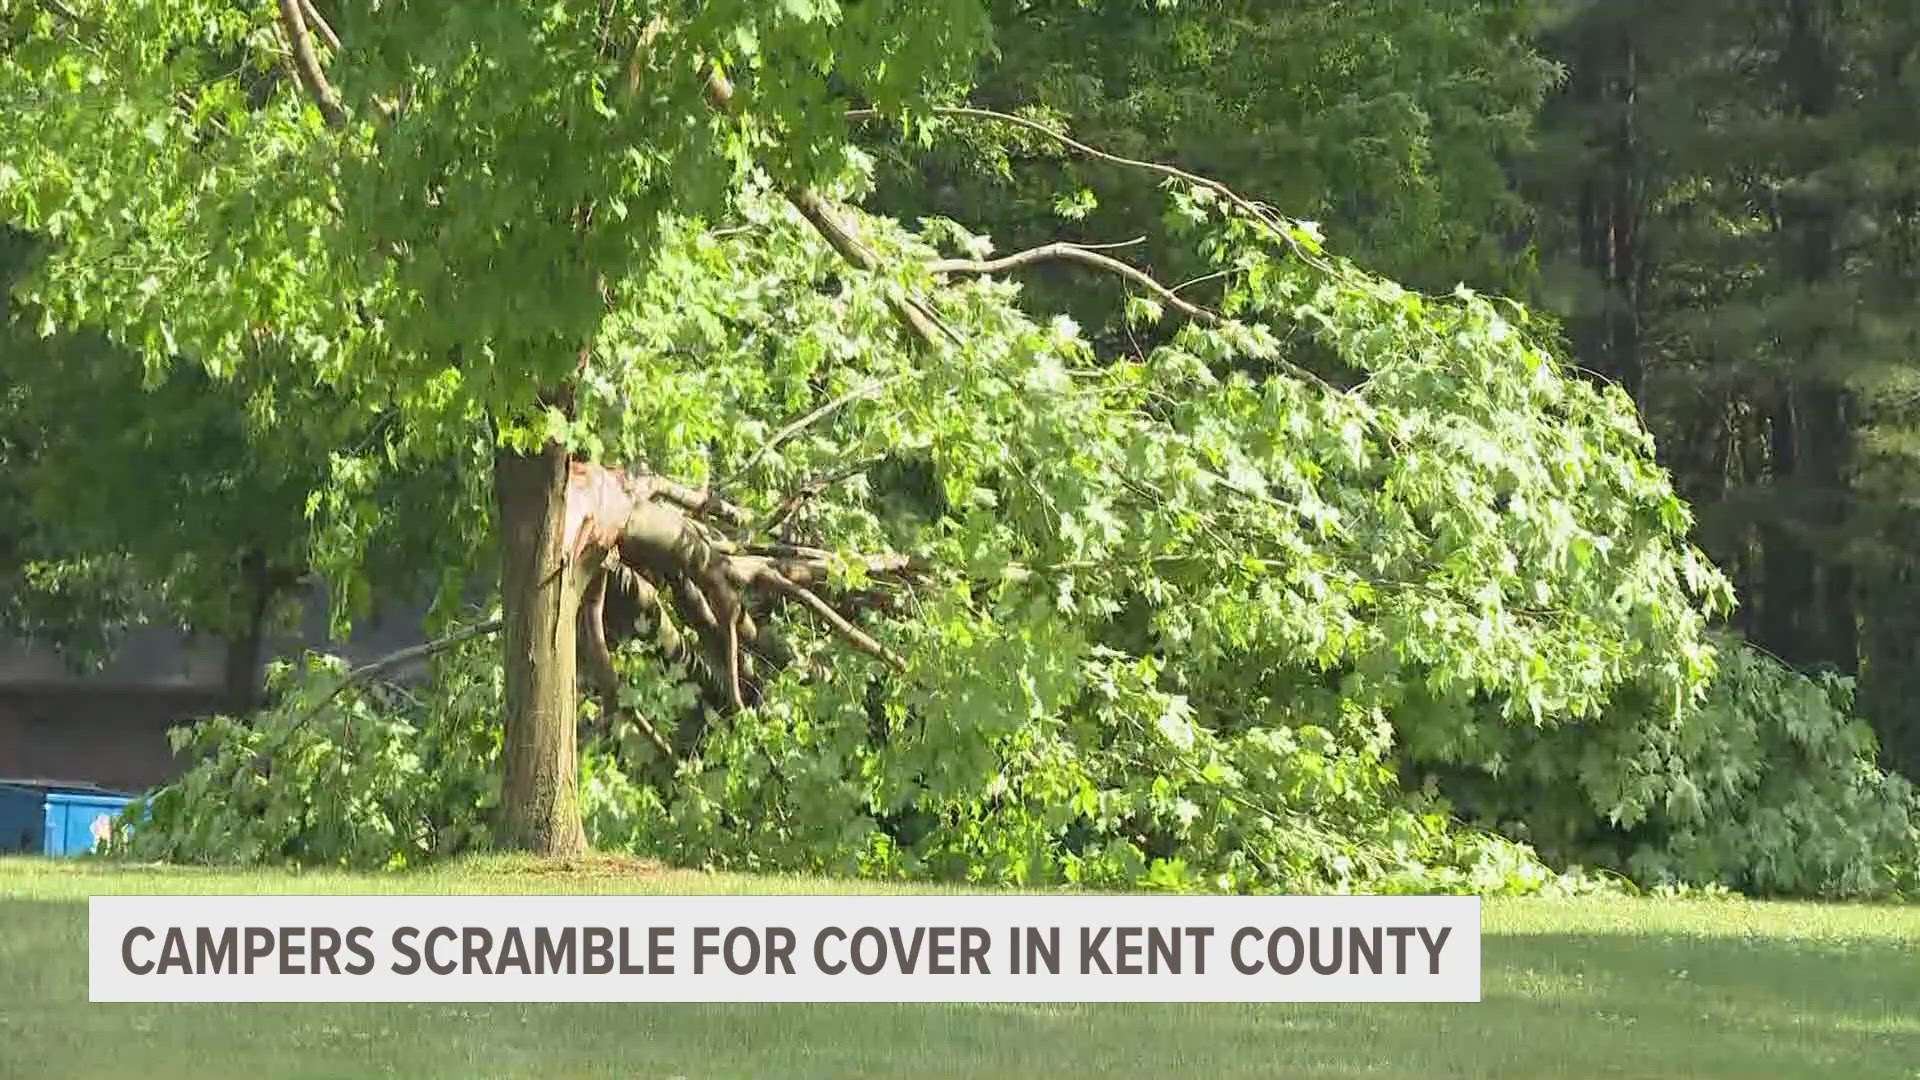 Thursday's storms caught many by surprise including campers in Northern Kent County who were forced to take cover in a bathroom for protection.